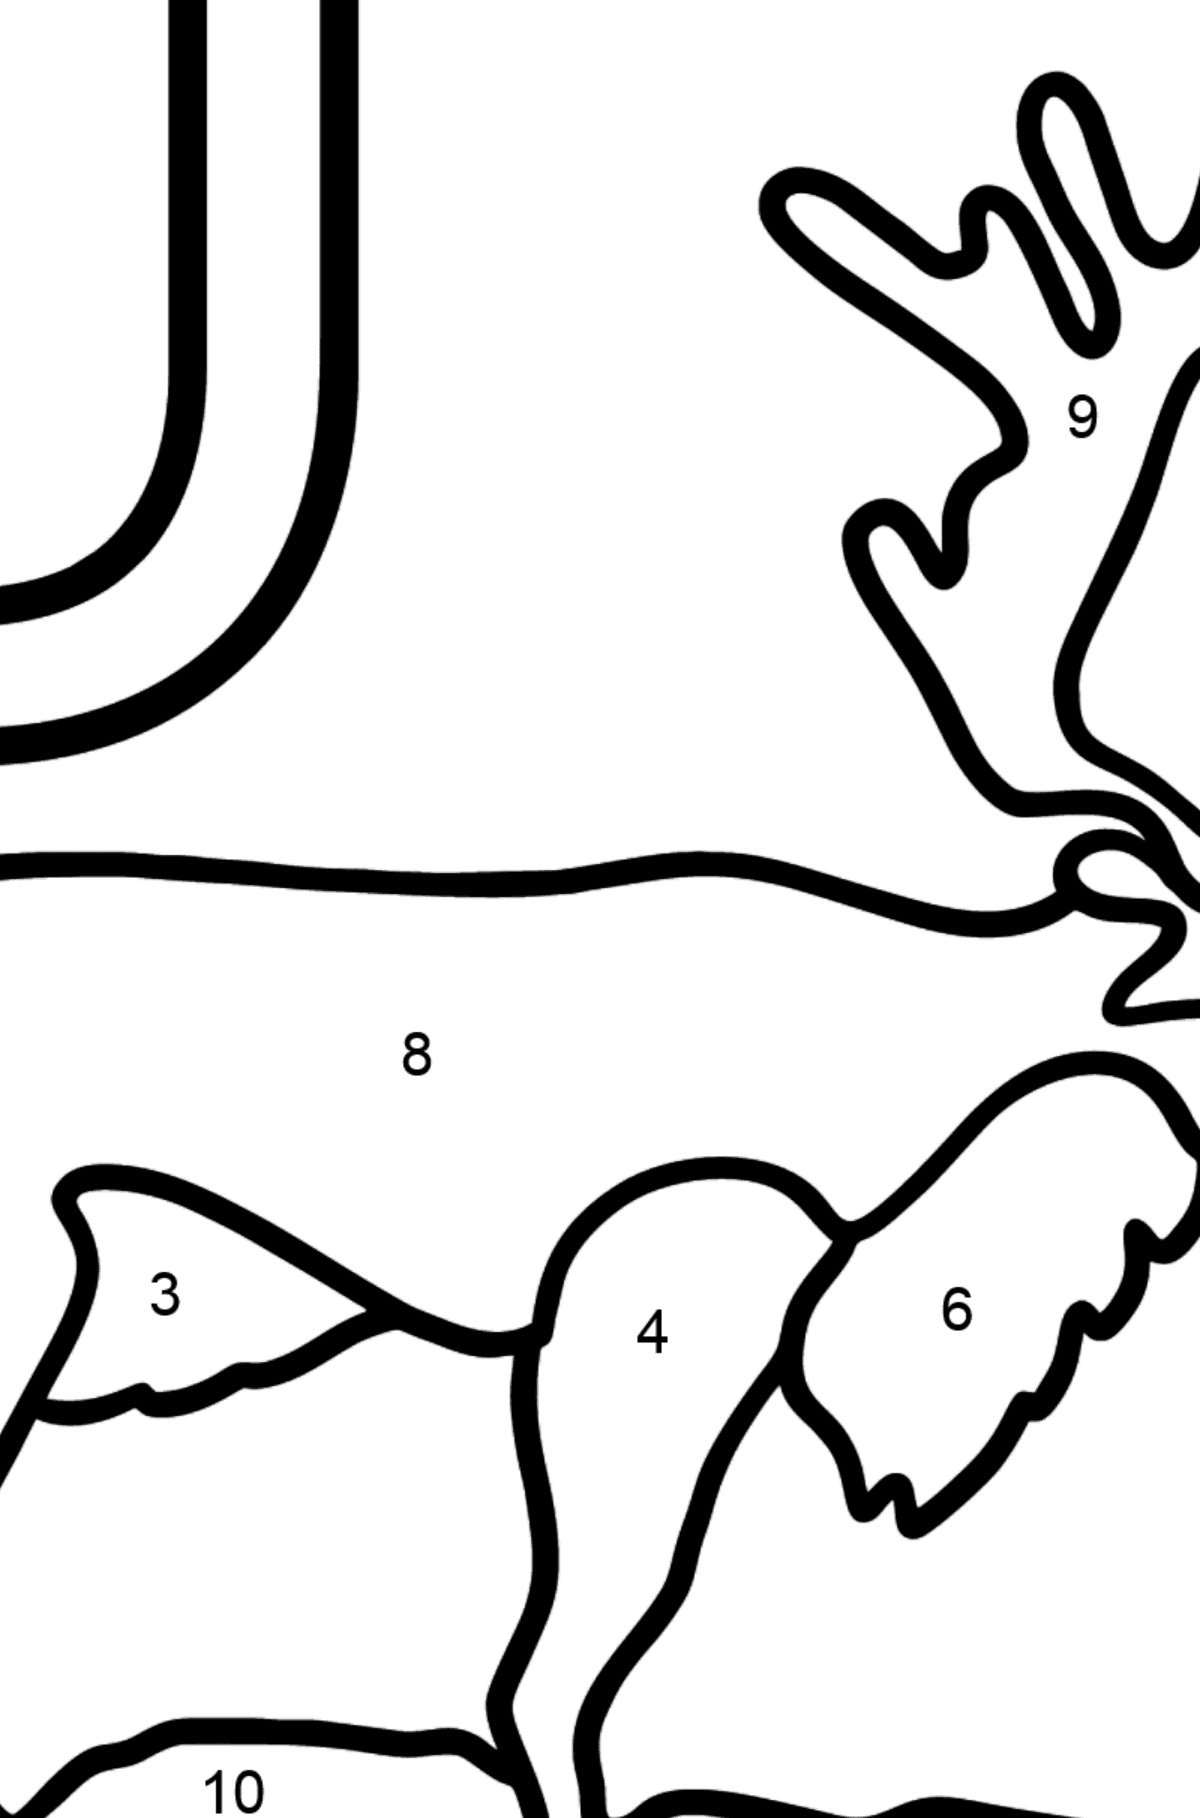 Spanish Letter U coloring pages - UAPITI - Coloring by Numbers for Kids